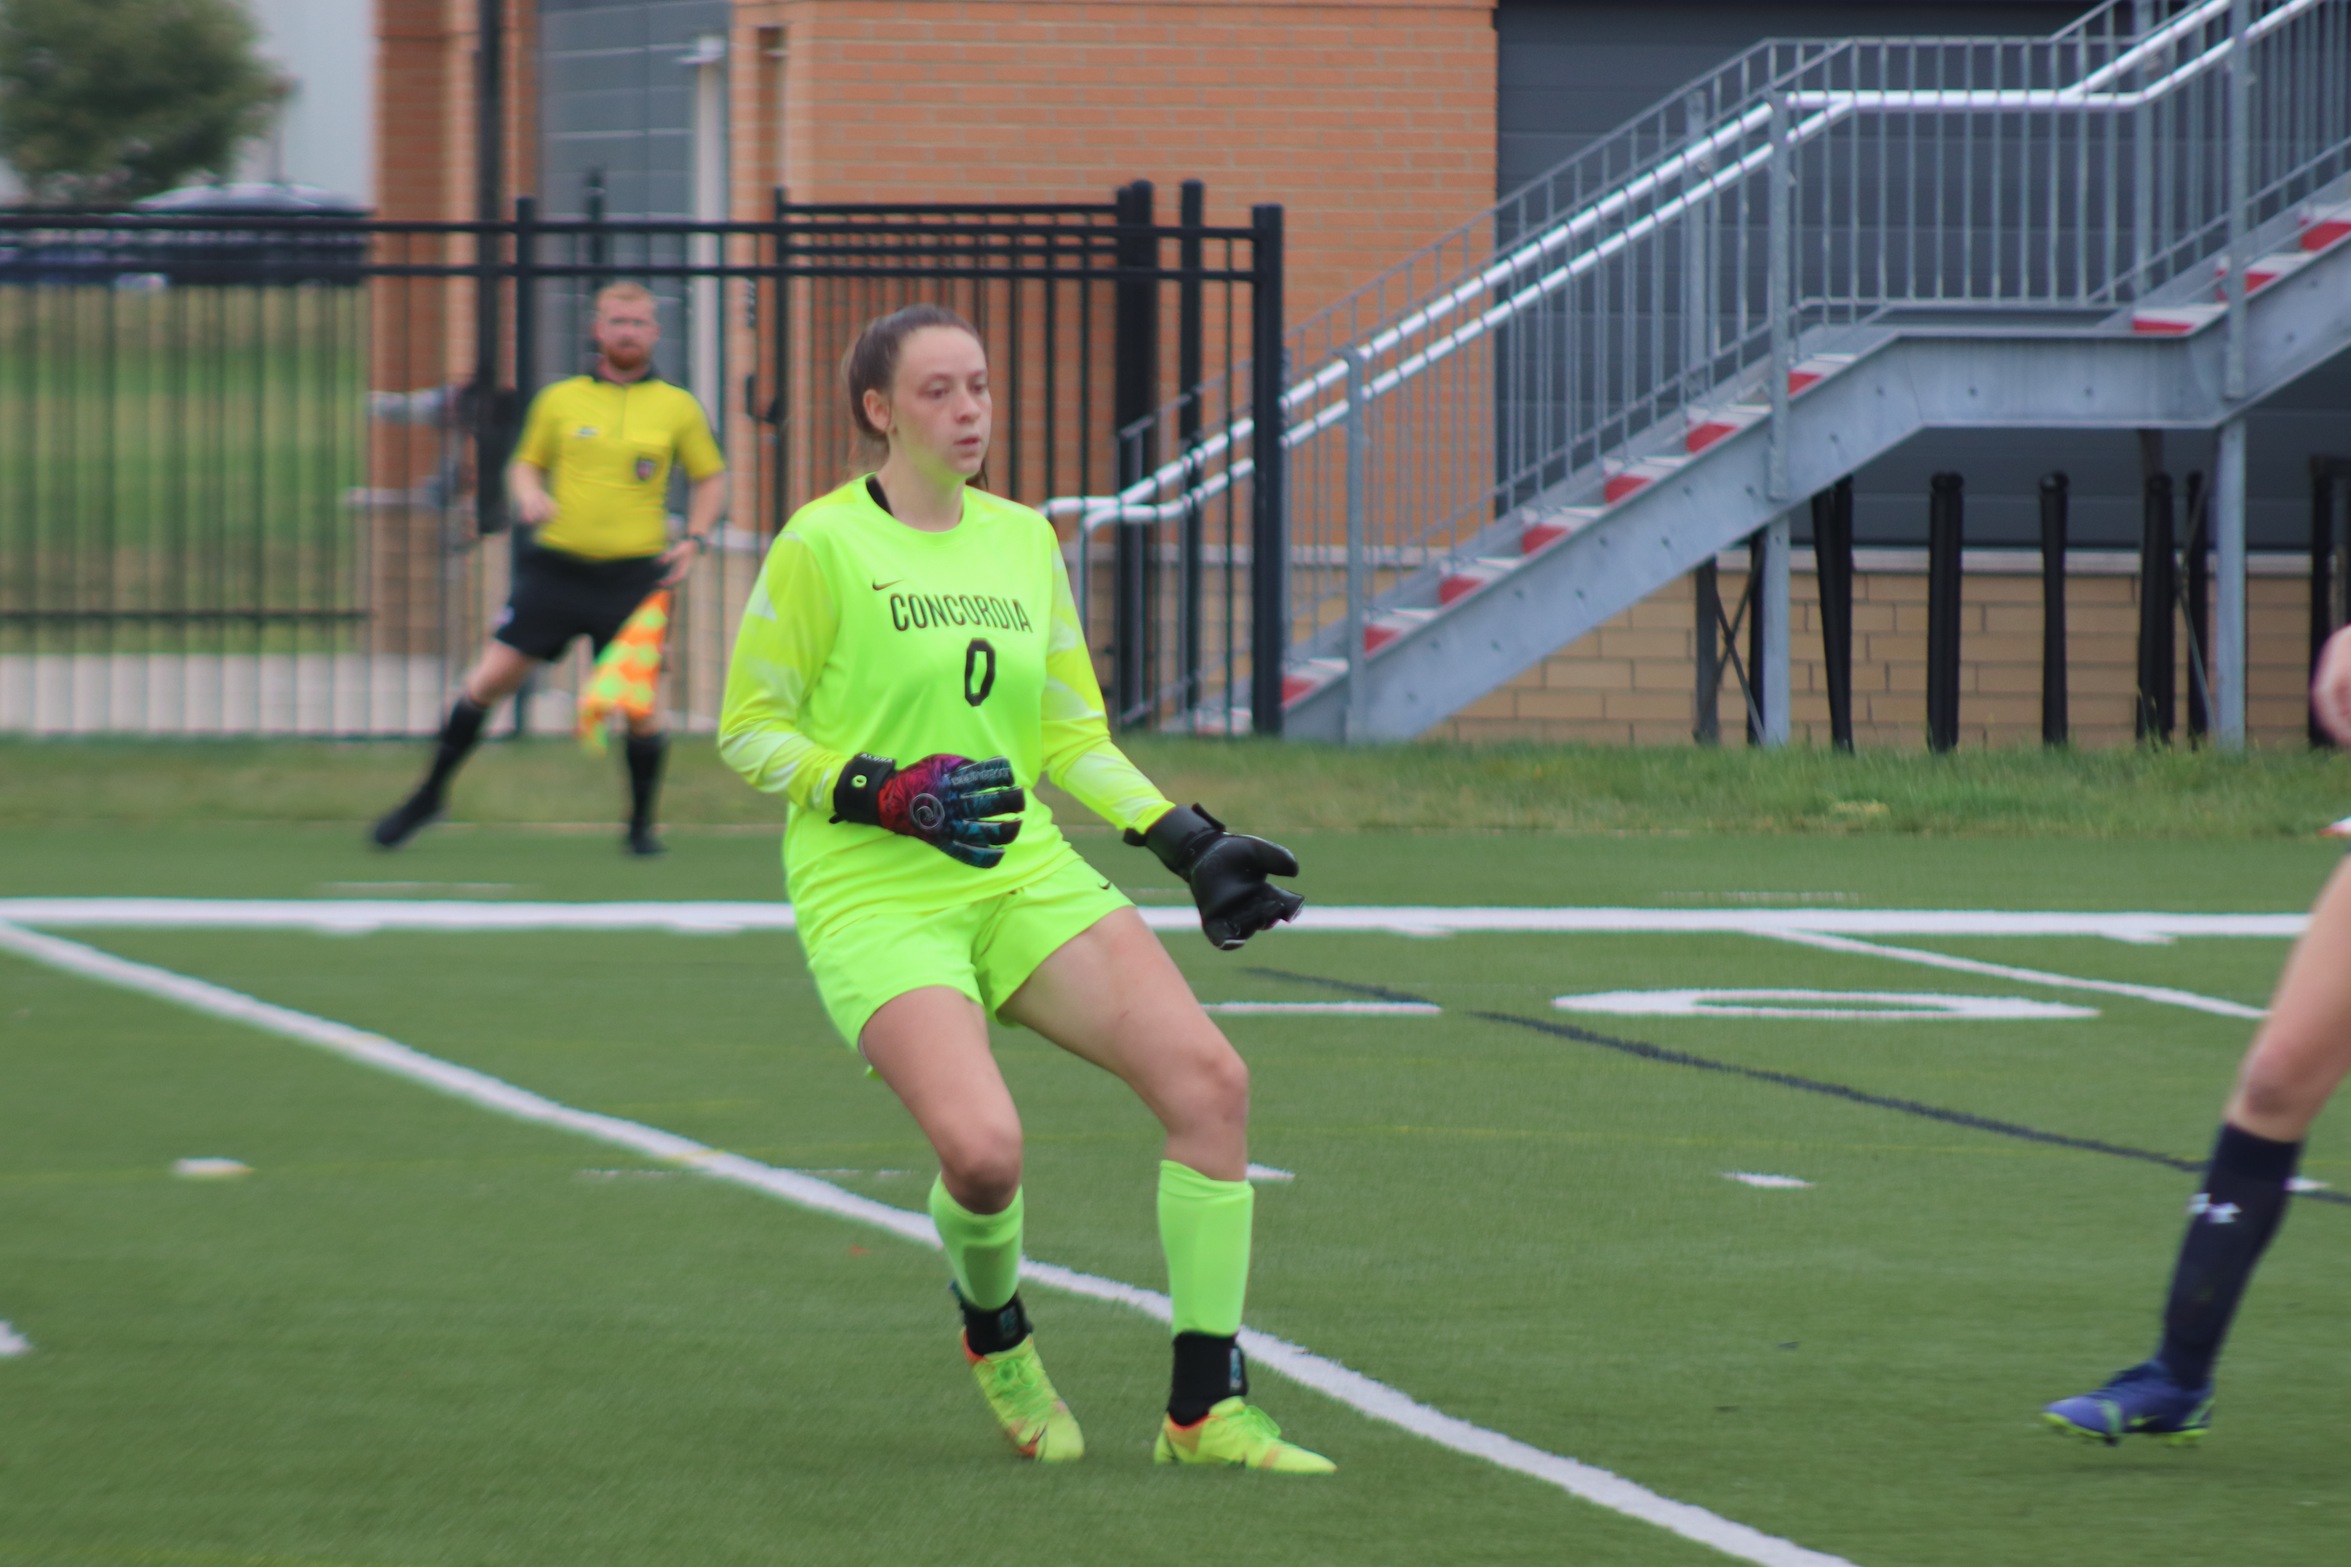 Jacobson's 12 saves leads Women's Soccer to scoreless draw against Ave Maria